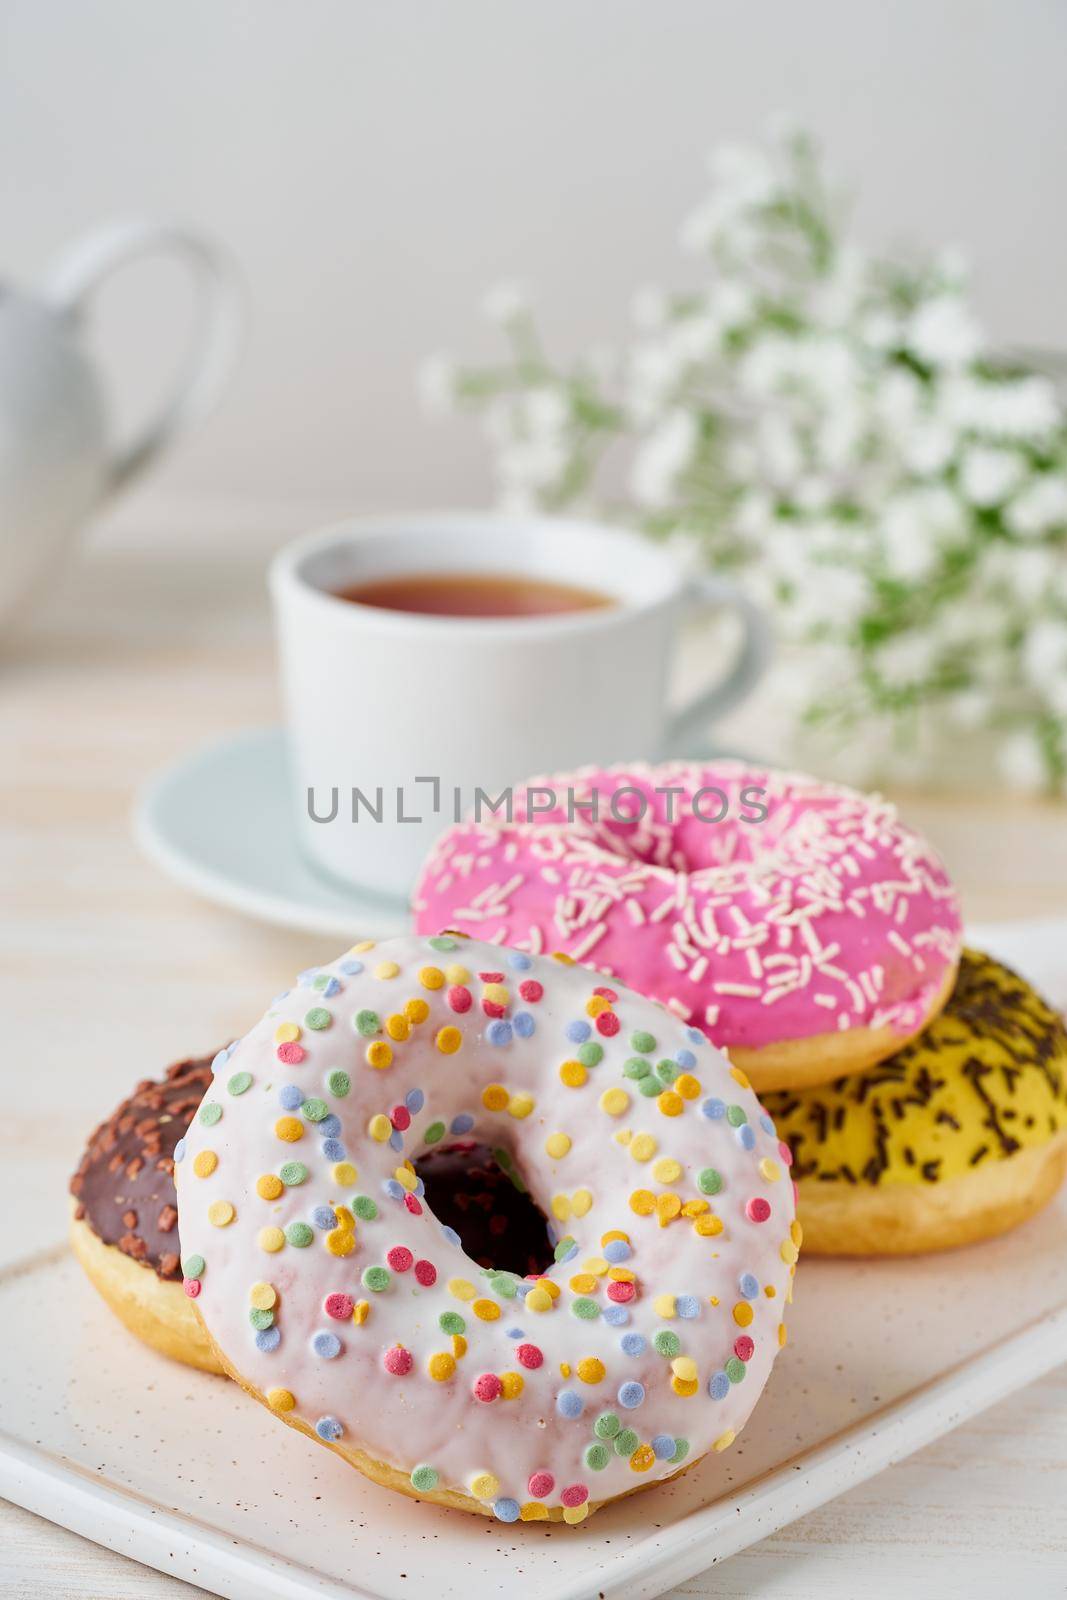 Doughnuts and tea. Bright, colorful junk food. Vertical. Light beige wooden background. Side view, close up.